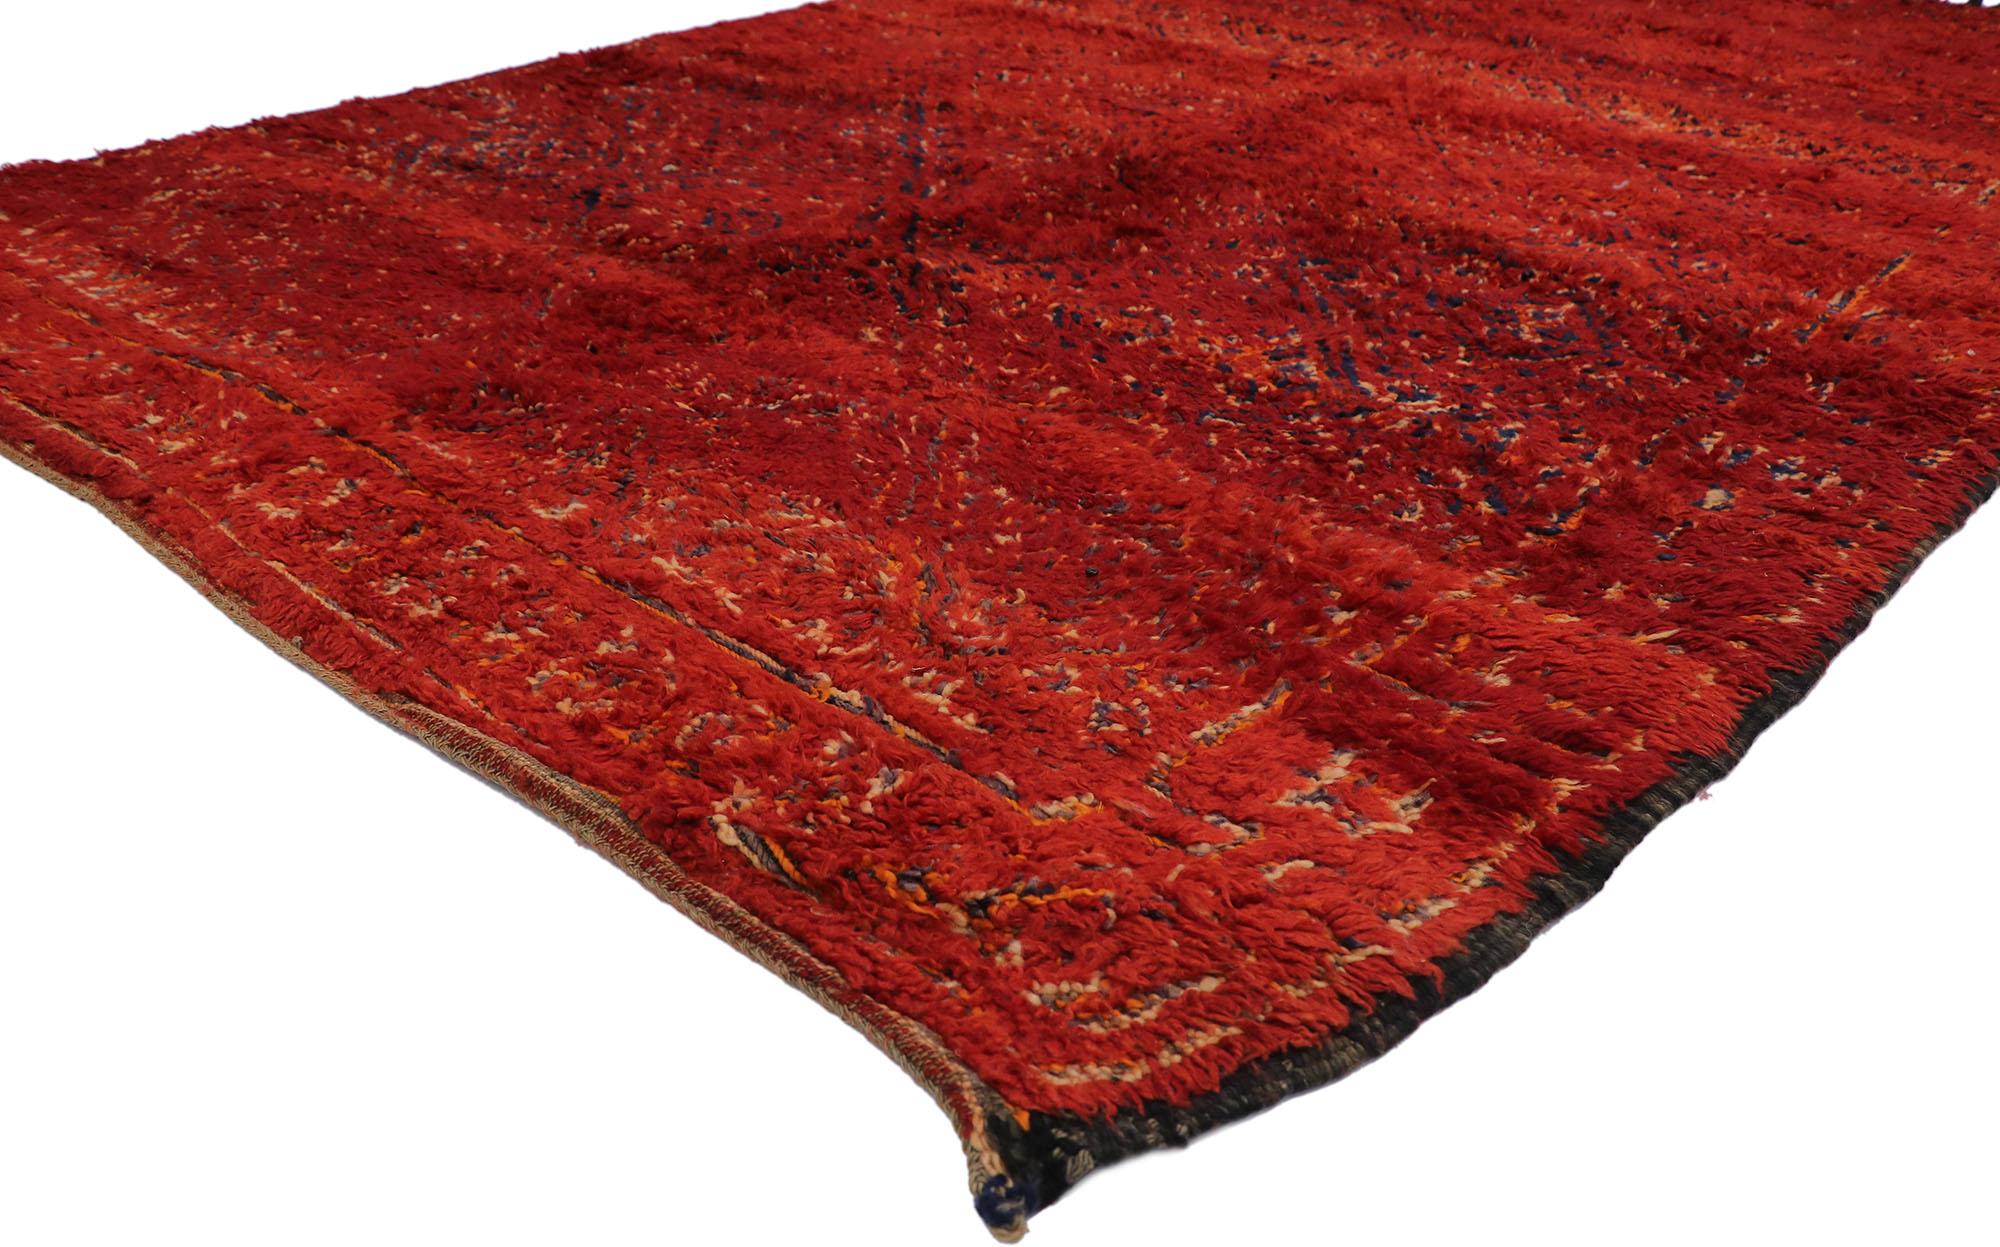 21269 vintage Berber Beni M'Guild Moroccan rug with Tribal style 06'05 x 09'09. With its simplicity, plush pile and tribal style, this hand knotted wool vintage Beni M'Guild Moroccan rug is a captivating vision of woven beauty. The abrashed red